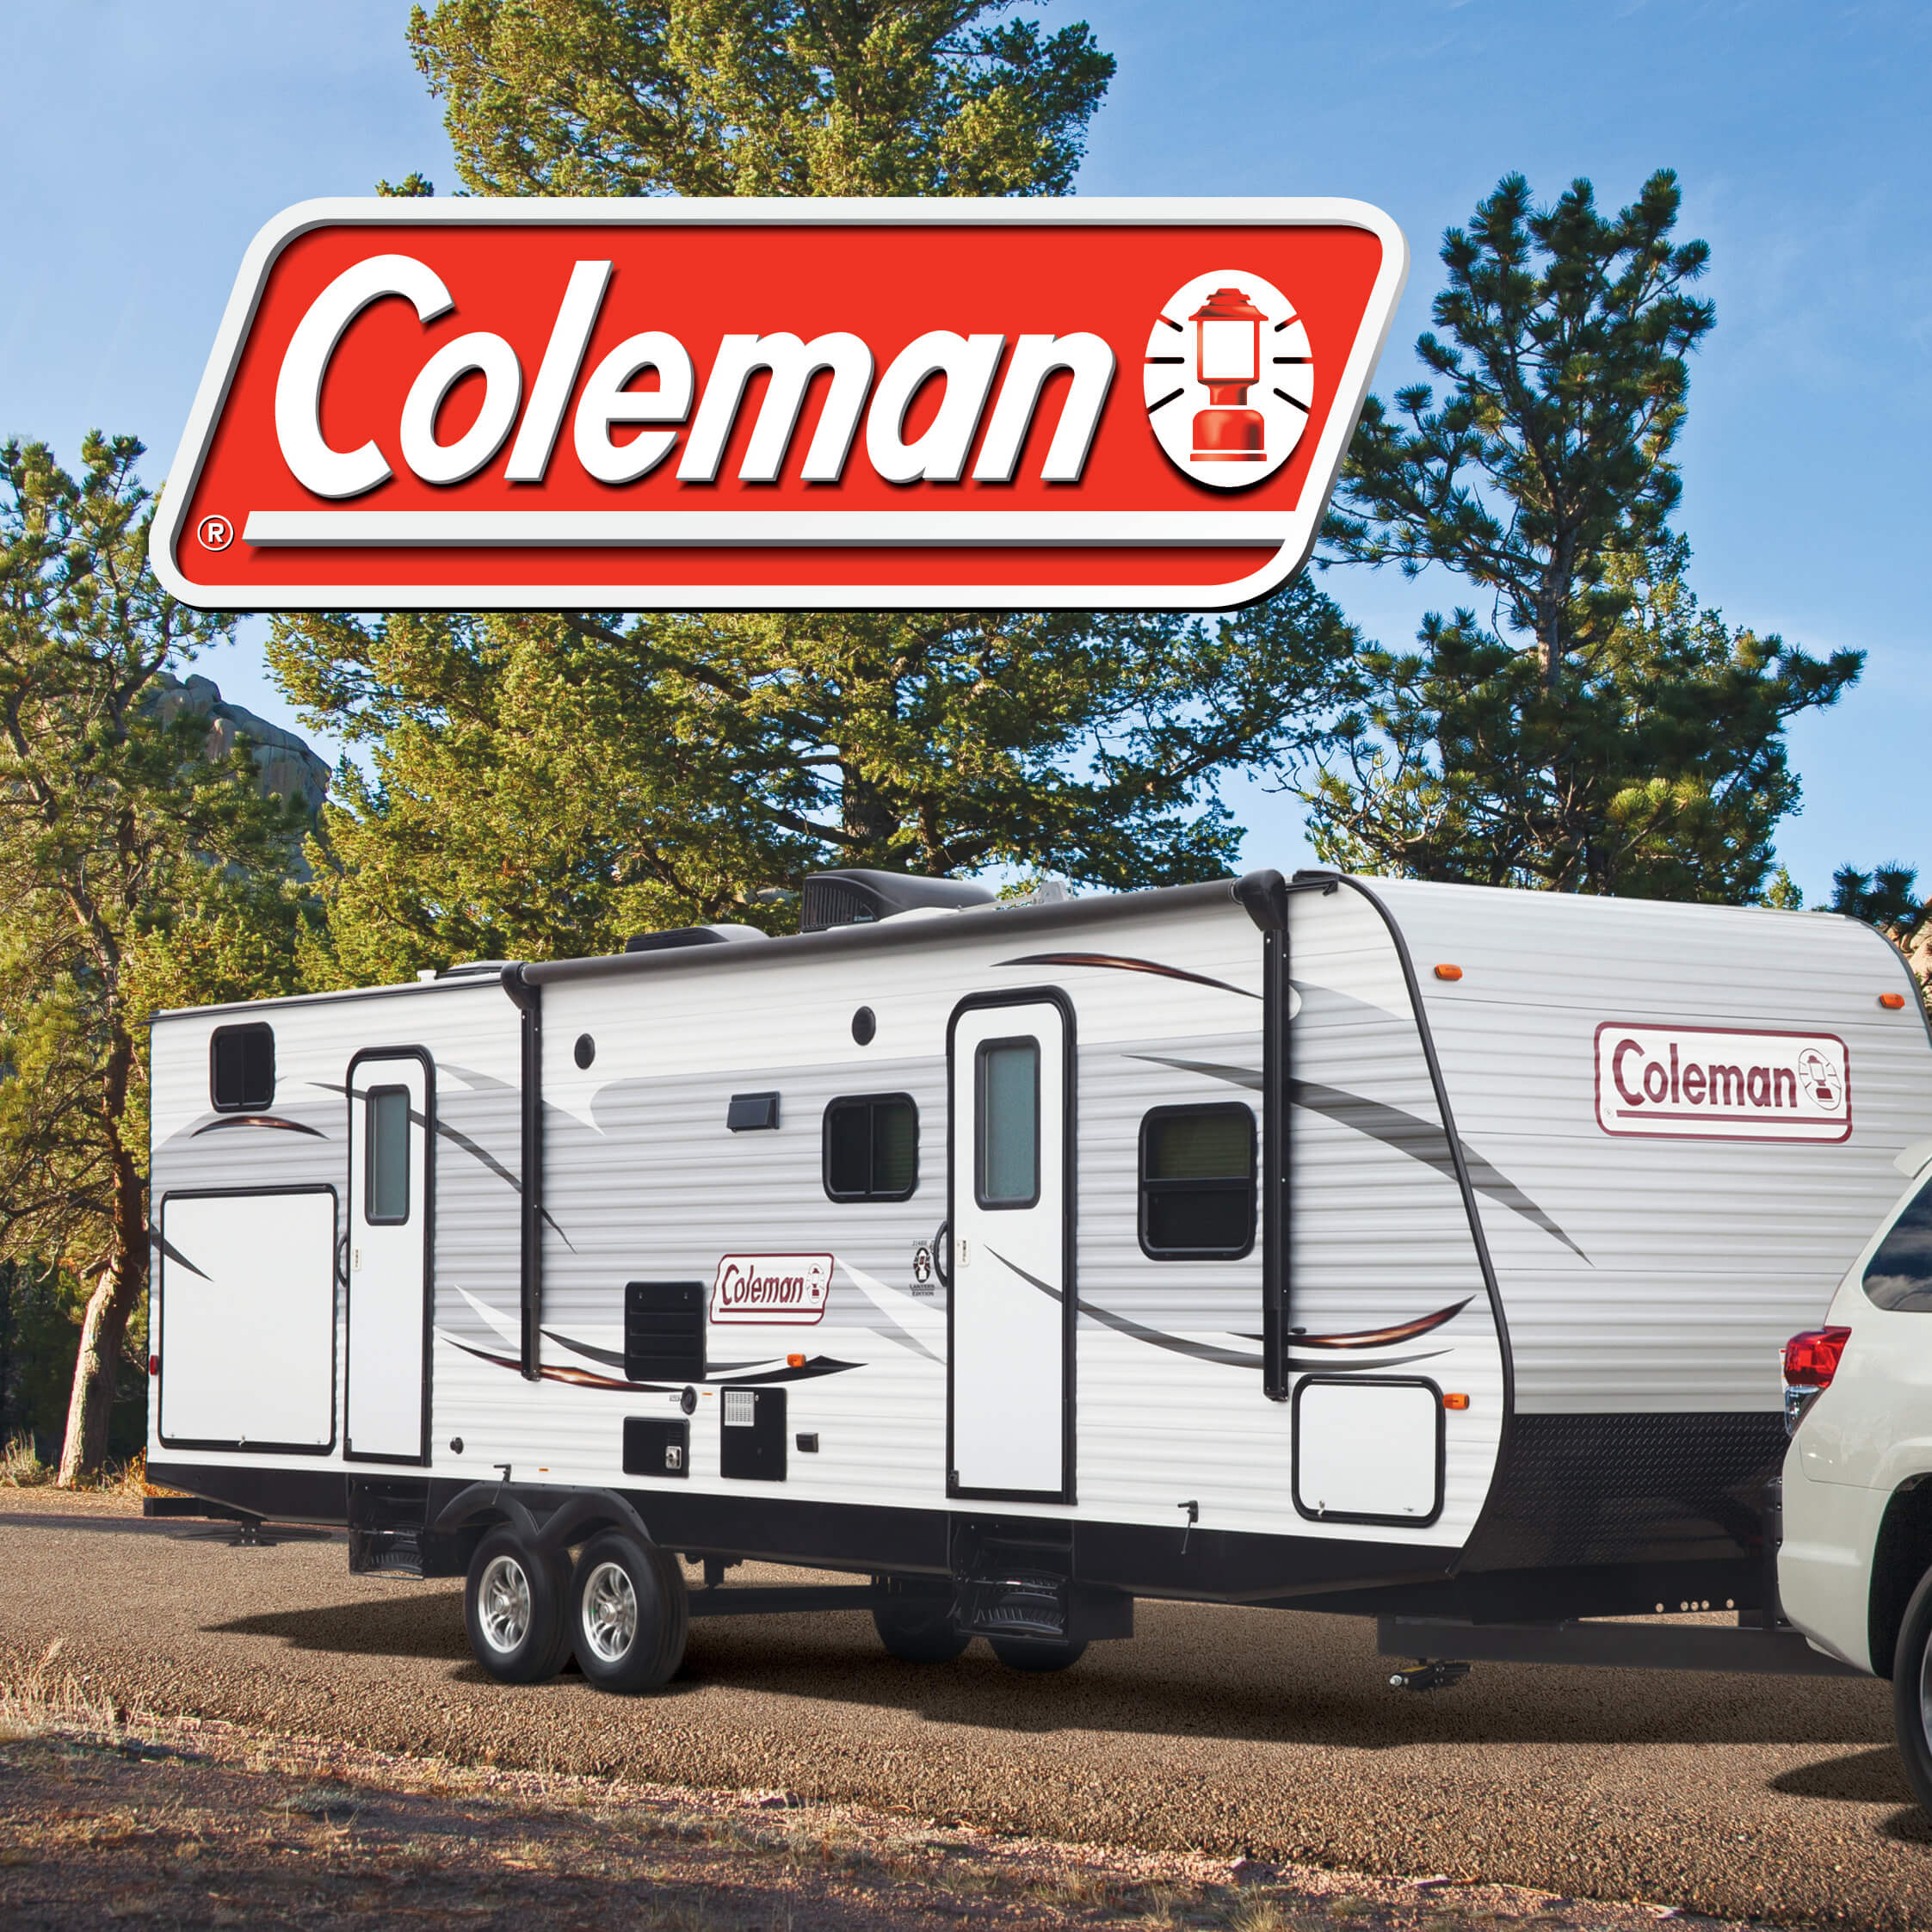 Coleman RV History Starts with the Coleman Company